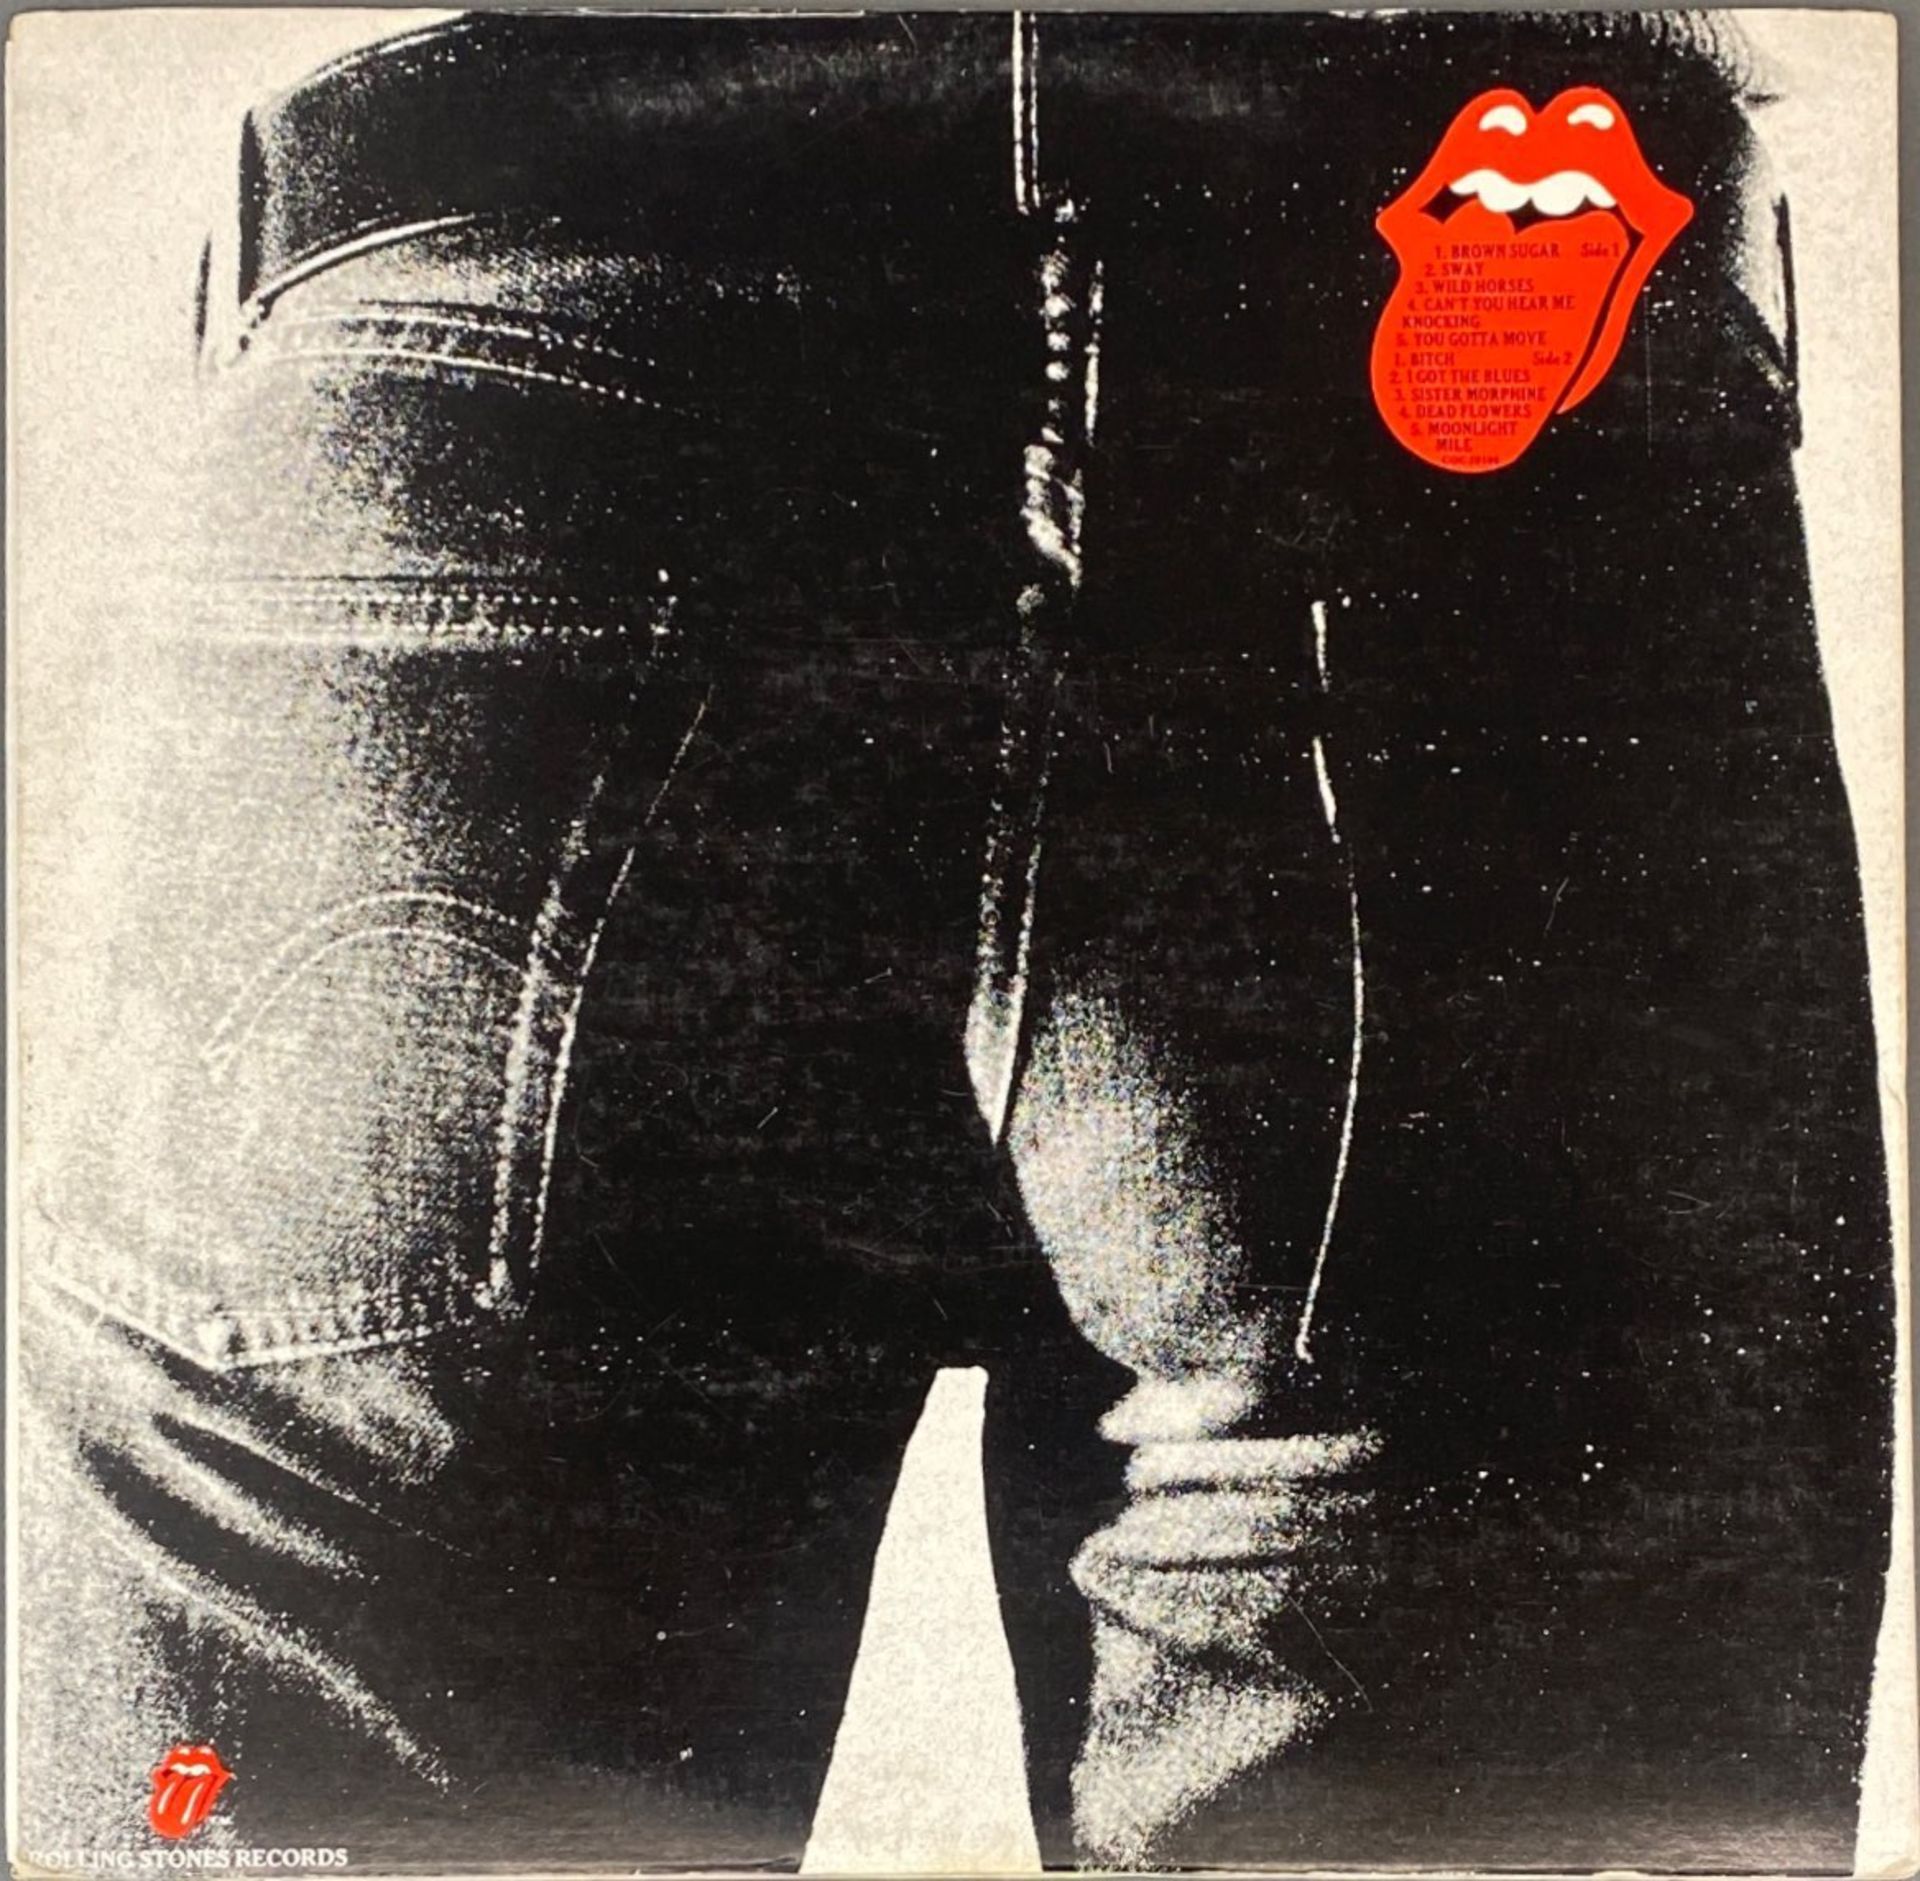 Sticky Fingers, 1971 Australian release, COC59100. - Image 2 of 6